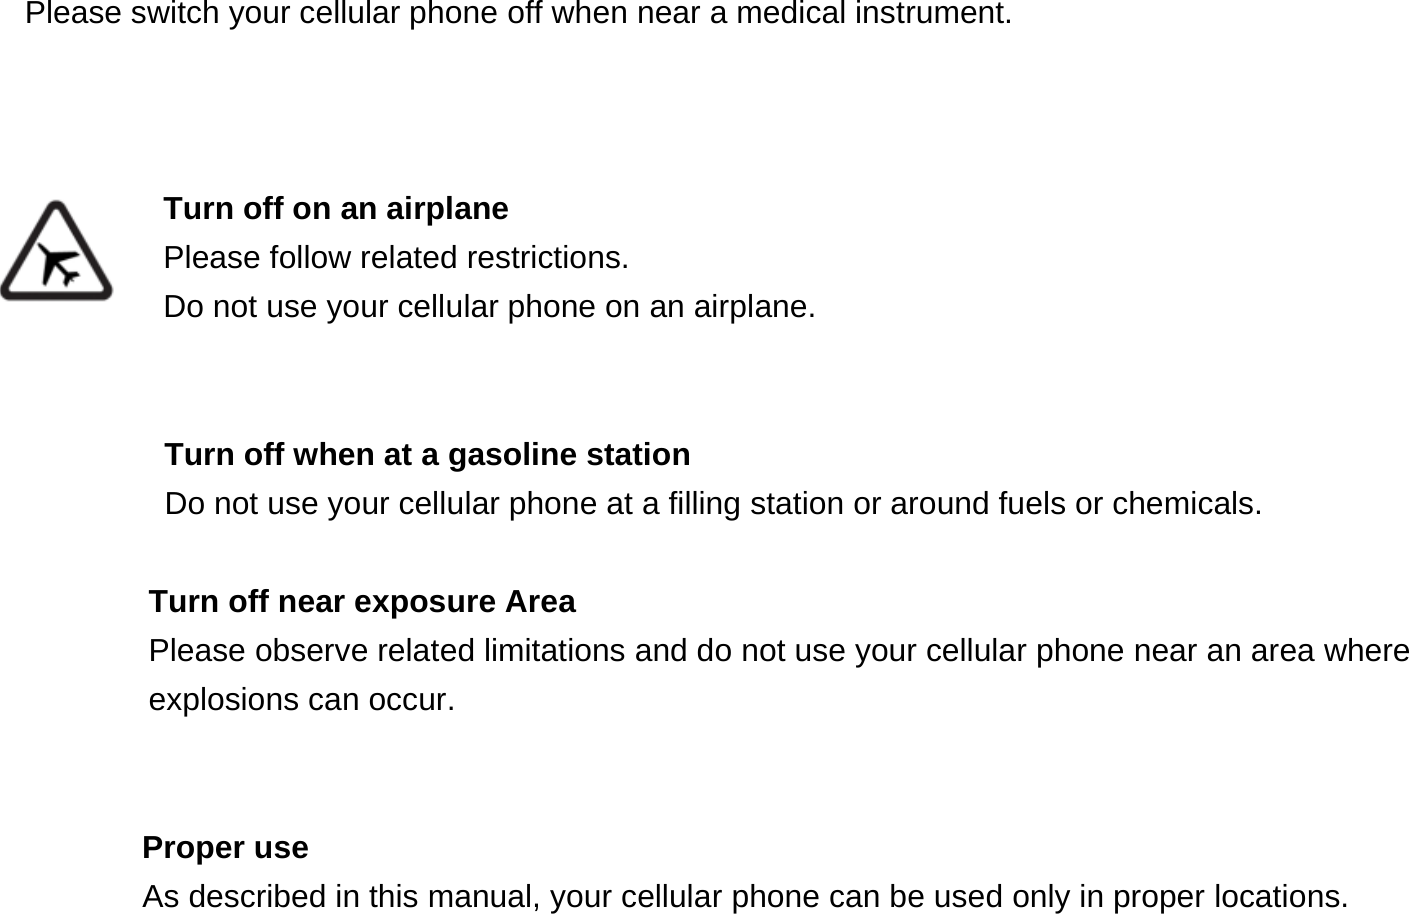 Please switch your cellular phone off when near a medical instrument.    Turn off on an airplane Please follow related restrictions. Do not use your cellular phone on an airplane.   Turn off when at a gasoline station Do not use your cellular phone at a filling station or around fuels or chemicals.  Turn off near exposure Area Please observe related limitations and do not use your cellular phone near an area where explosions can occur.   Proper use As described in this manual, your cellular phone can be used only in proper locations. 